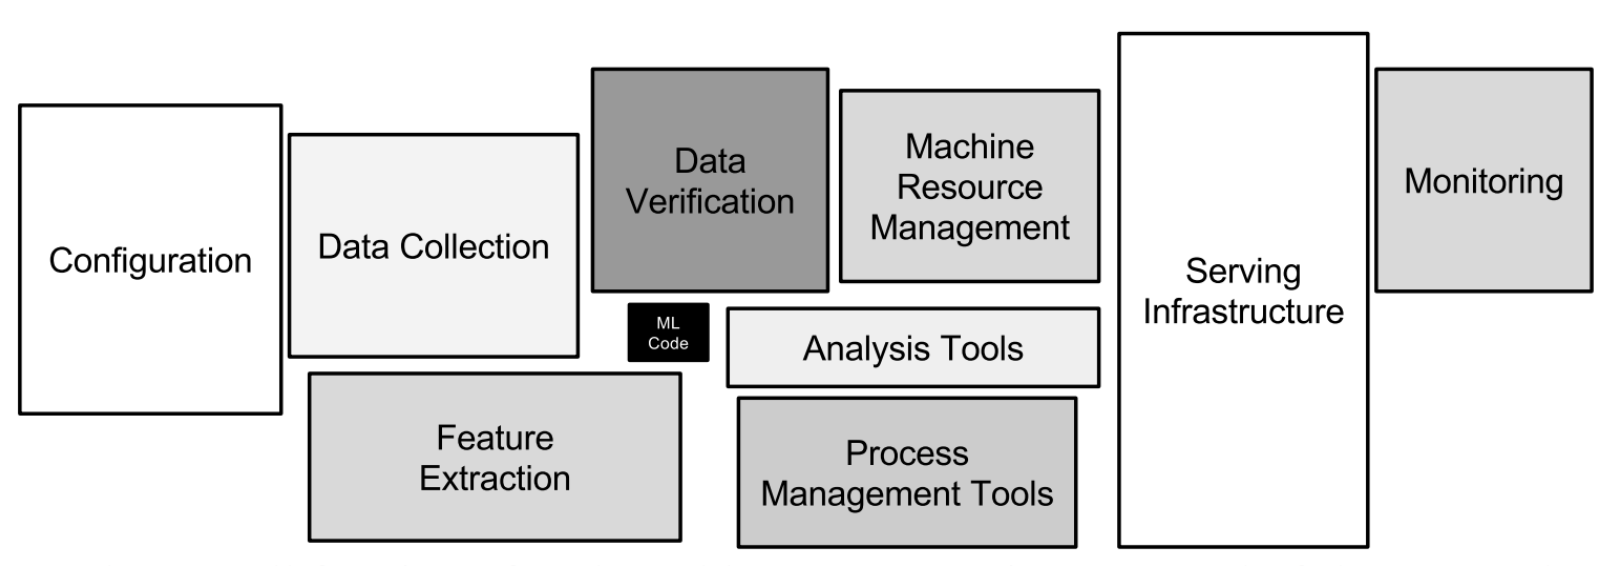 Components of the machine learning infrastructure